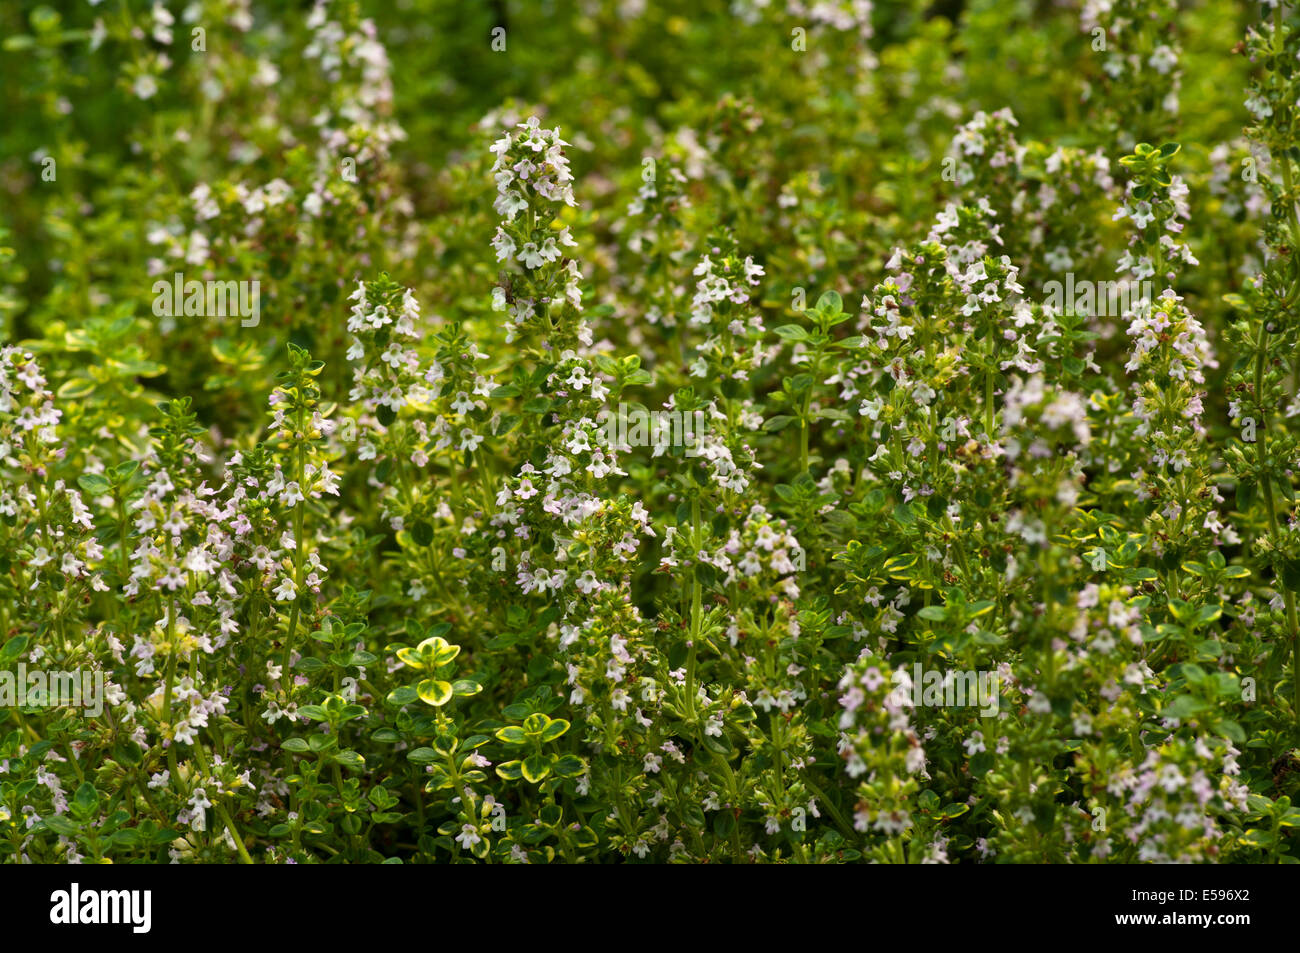 Thymus citriodorus commonly known as Lemon Variegated Thyme Stock Photo